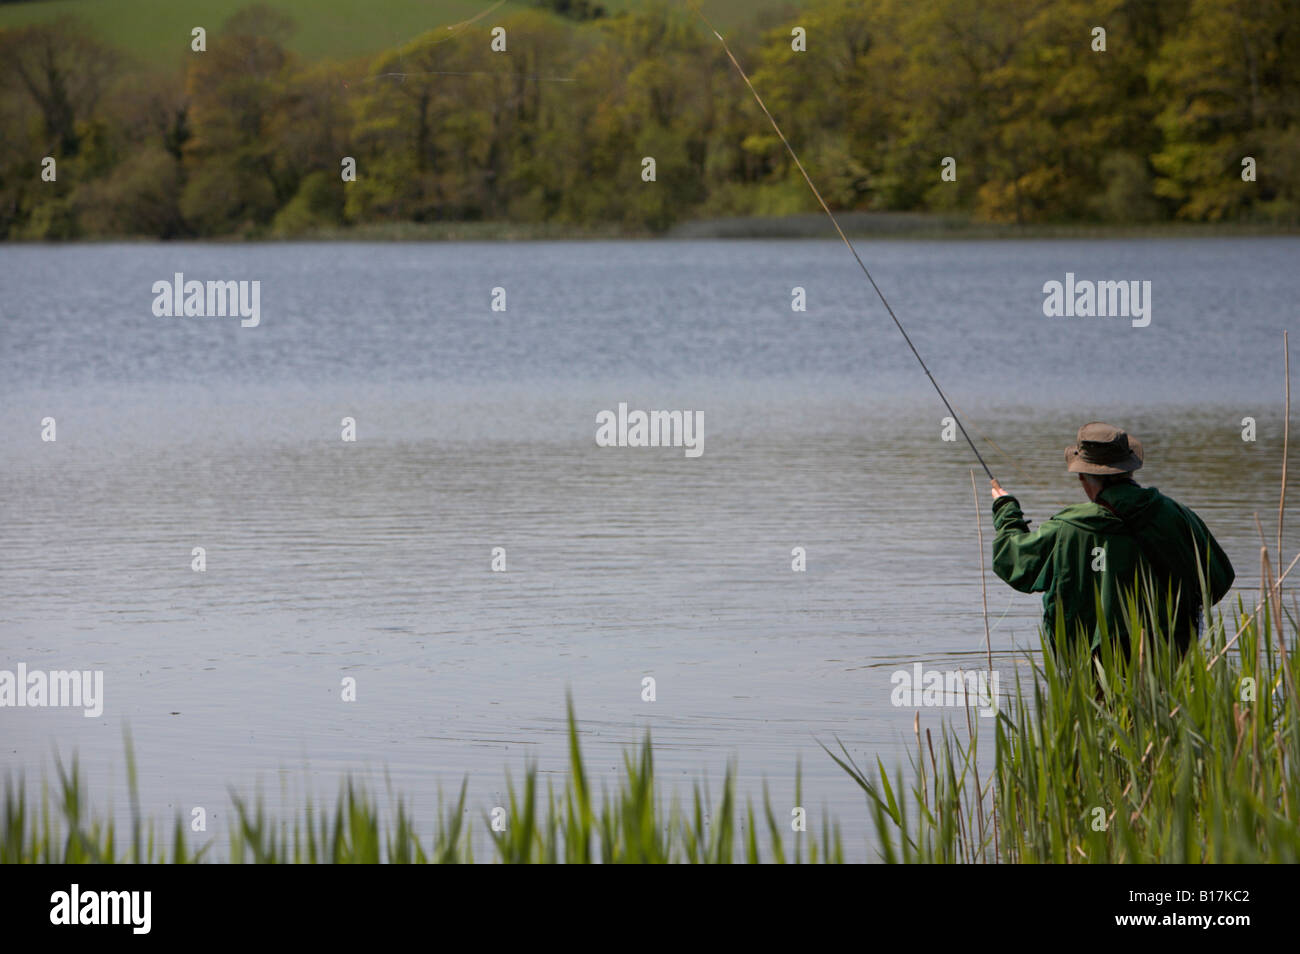 man casting flyfishing rod and line in a lake in county down northern ireland Stock Photo